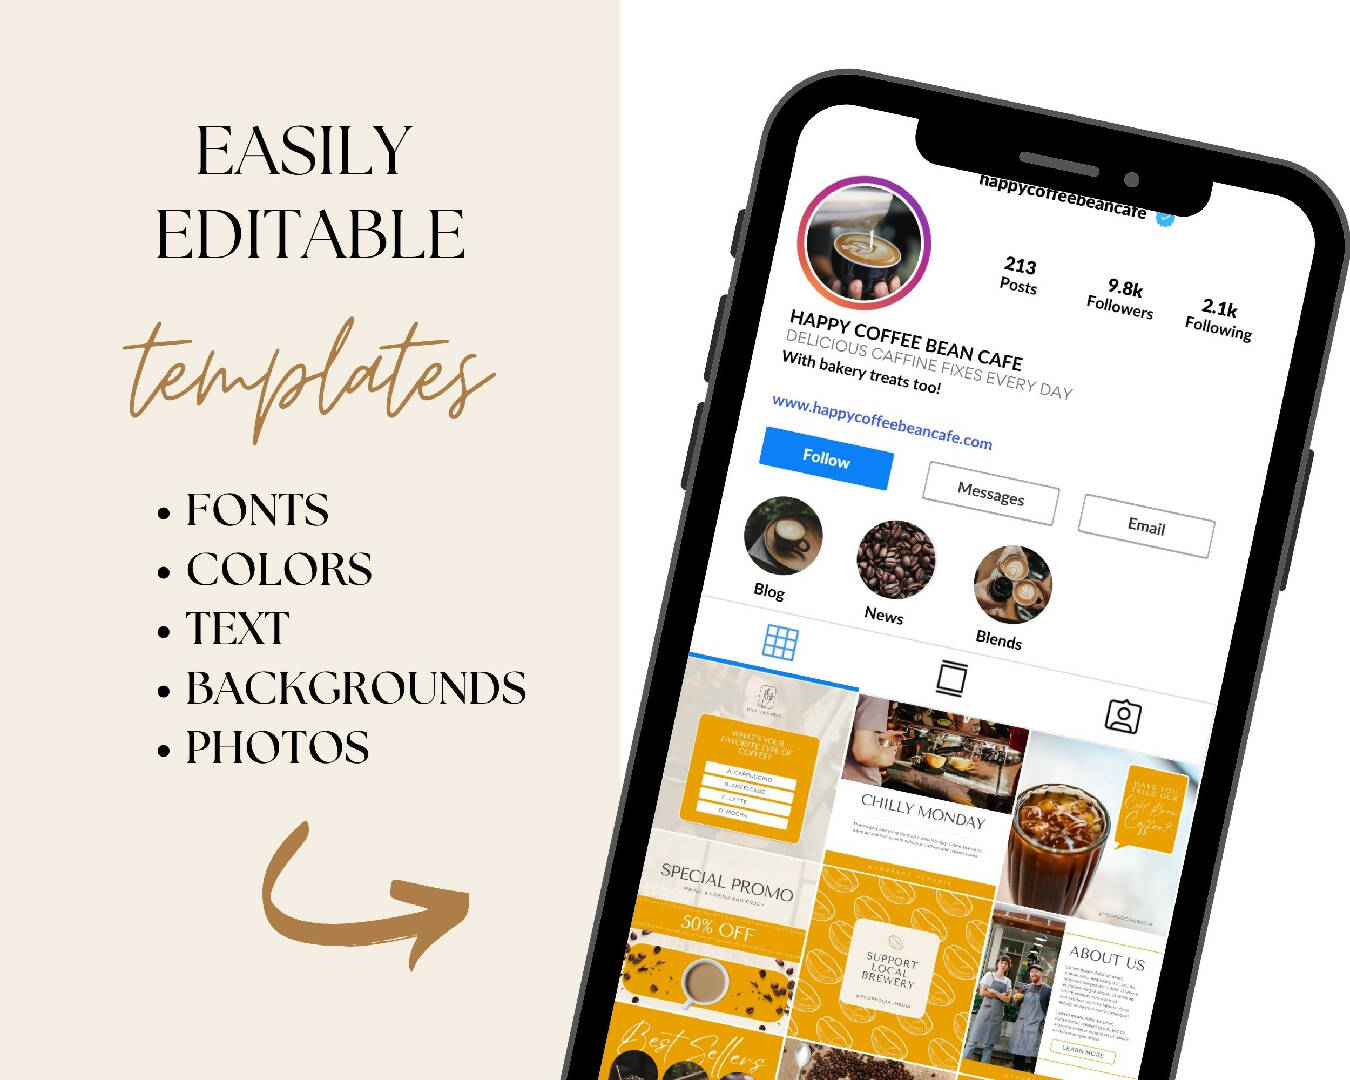 Coffee Instagram Templates, Cafe Social Media Posts, Canva Templates For Restaurants, Coffee Shop Marketing, Coffee Lover IG Posts, Modern